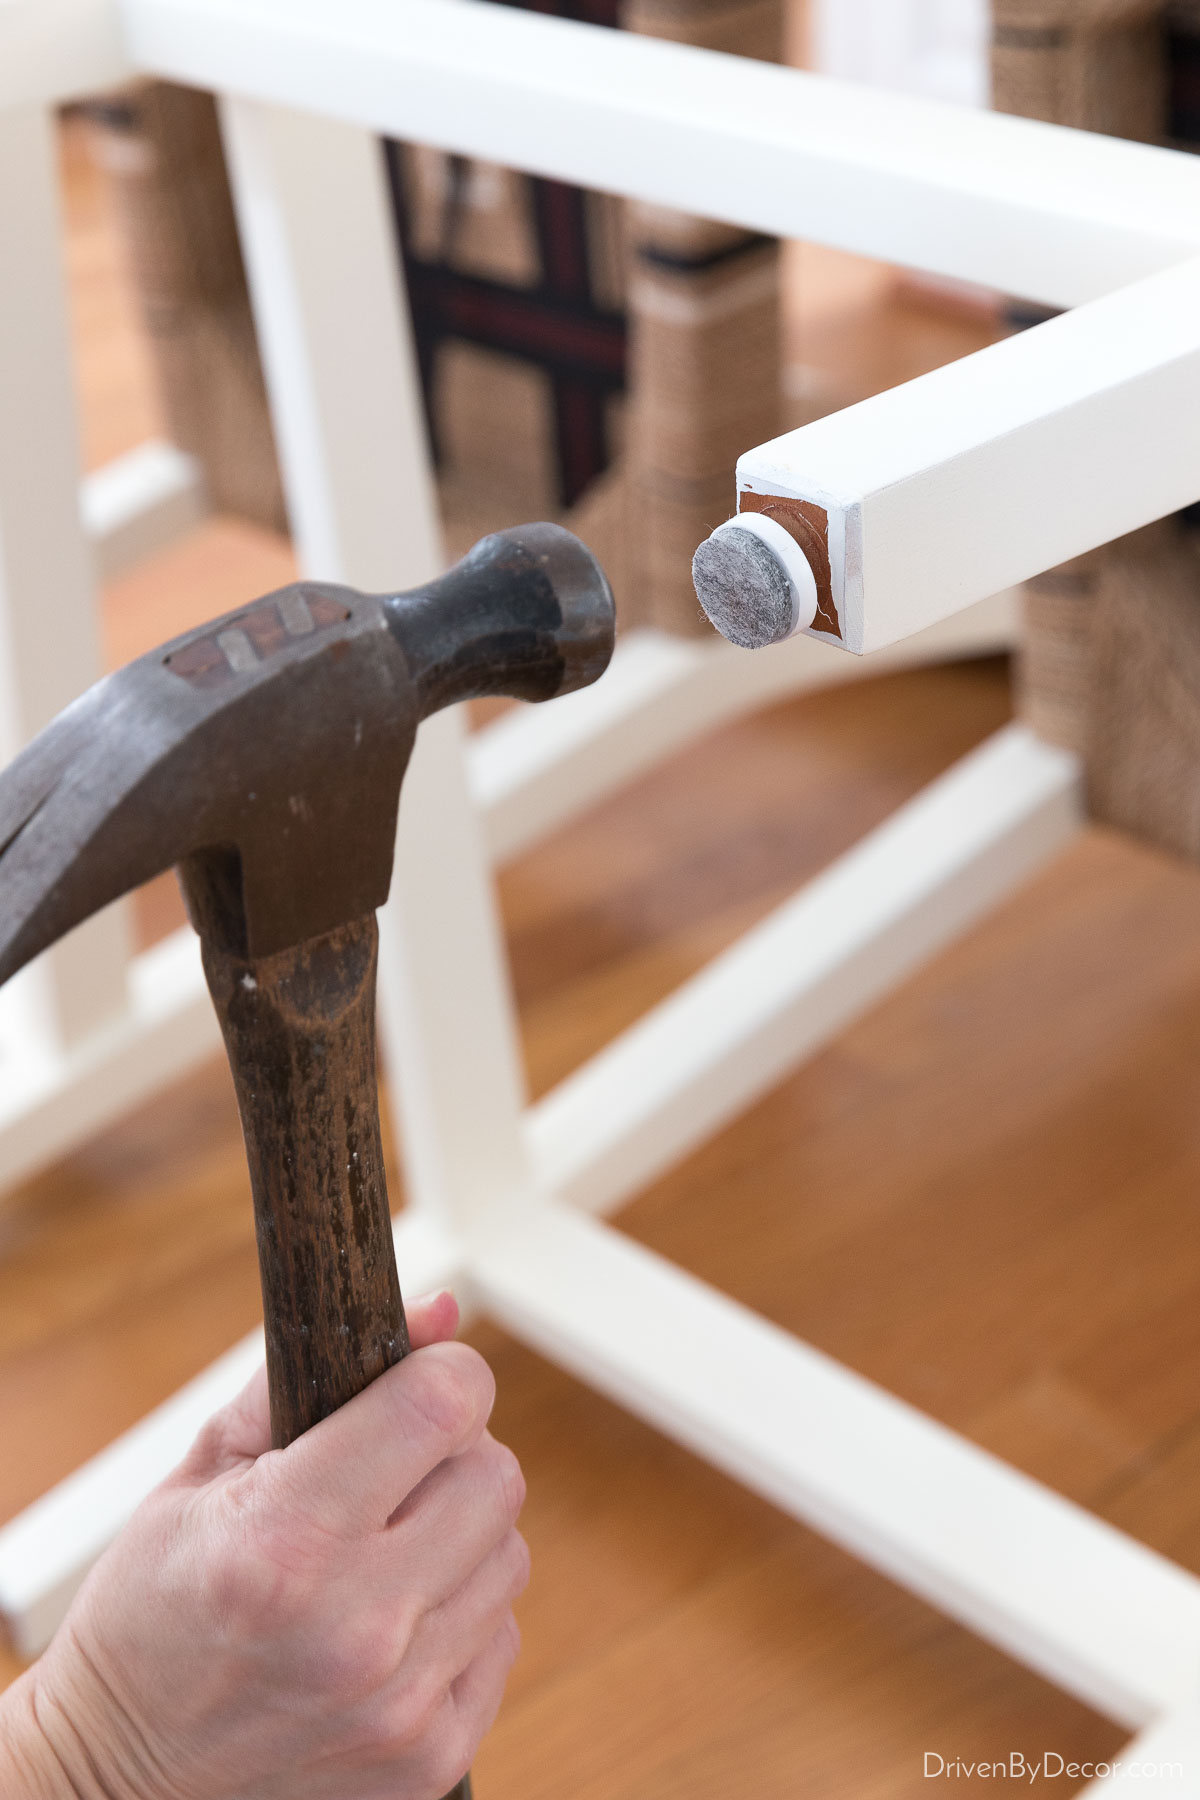 Nailing felt pads onto the feet of chairs to protect hardwood floors